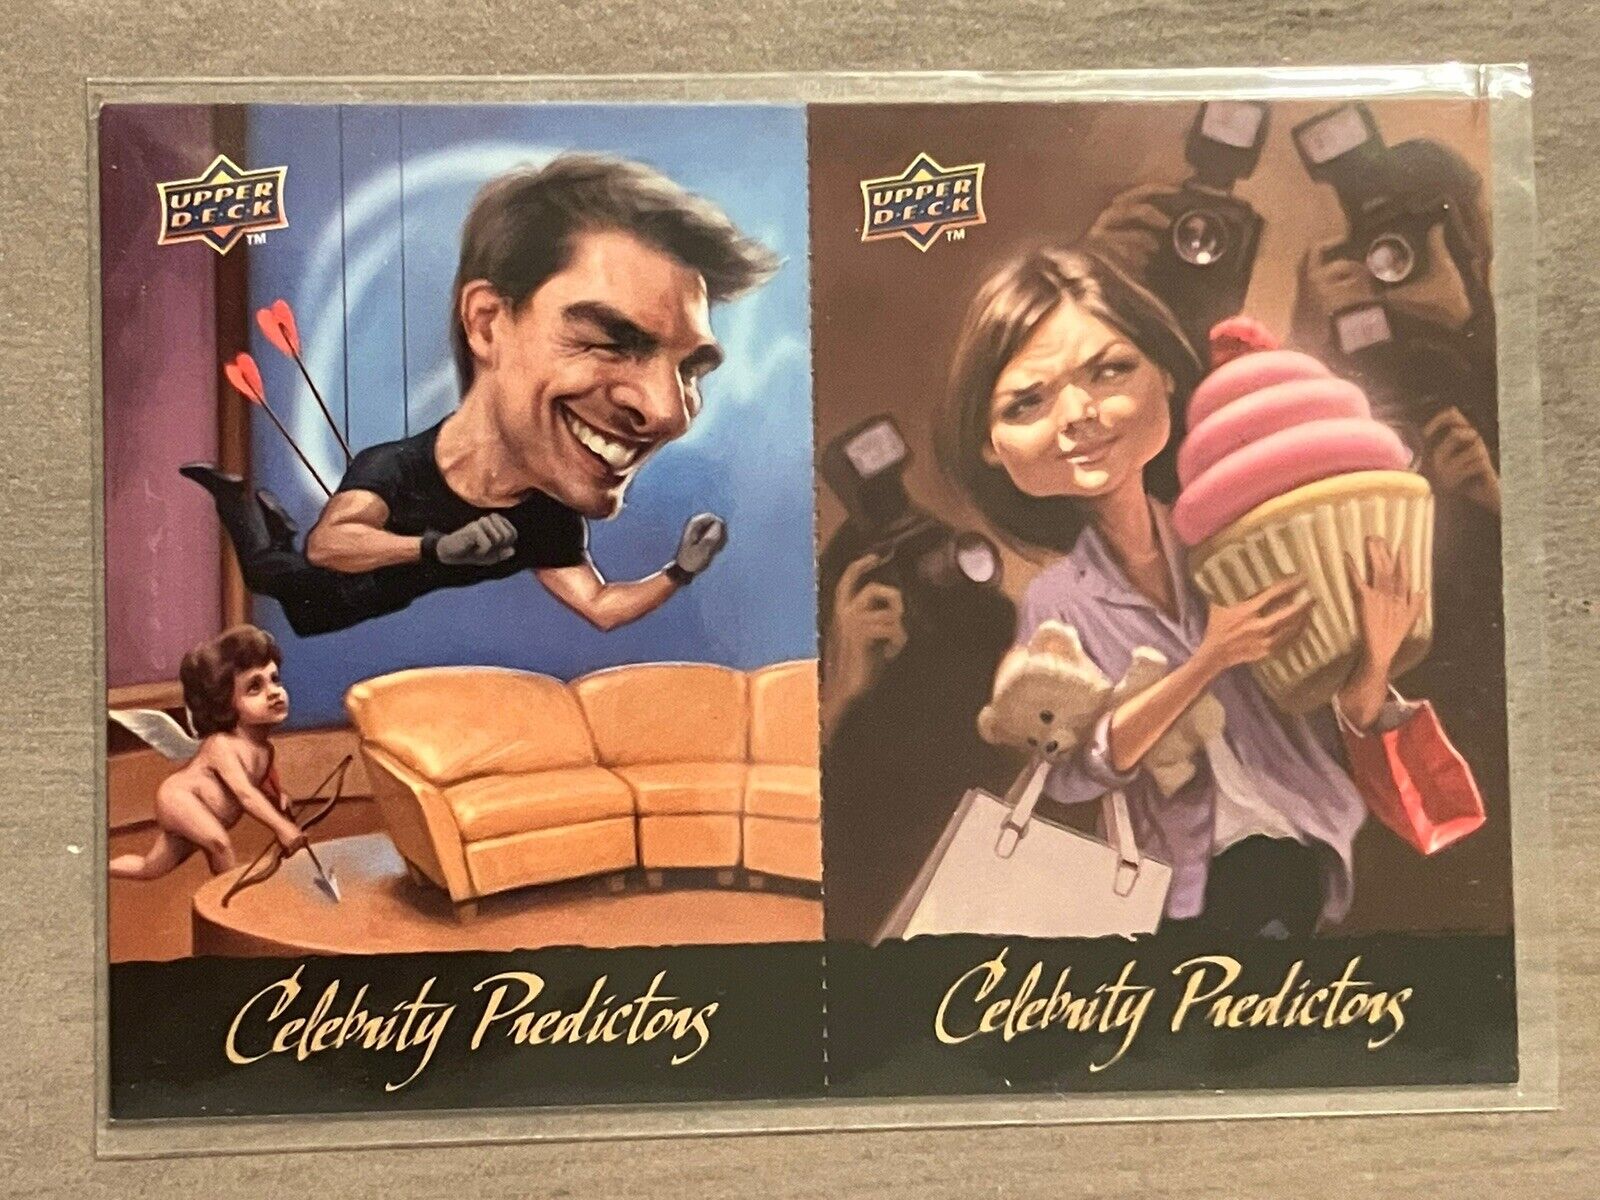 Tom Cruise / Katie Holmes 2010 Upper Deck Celebrity Predictions Card.